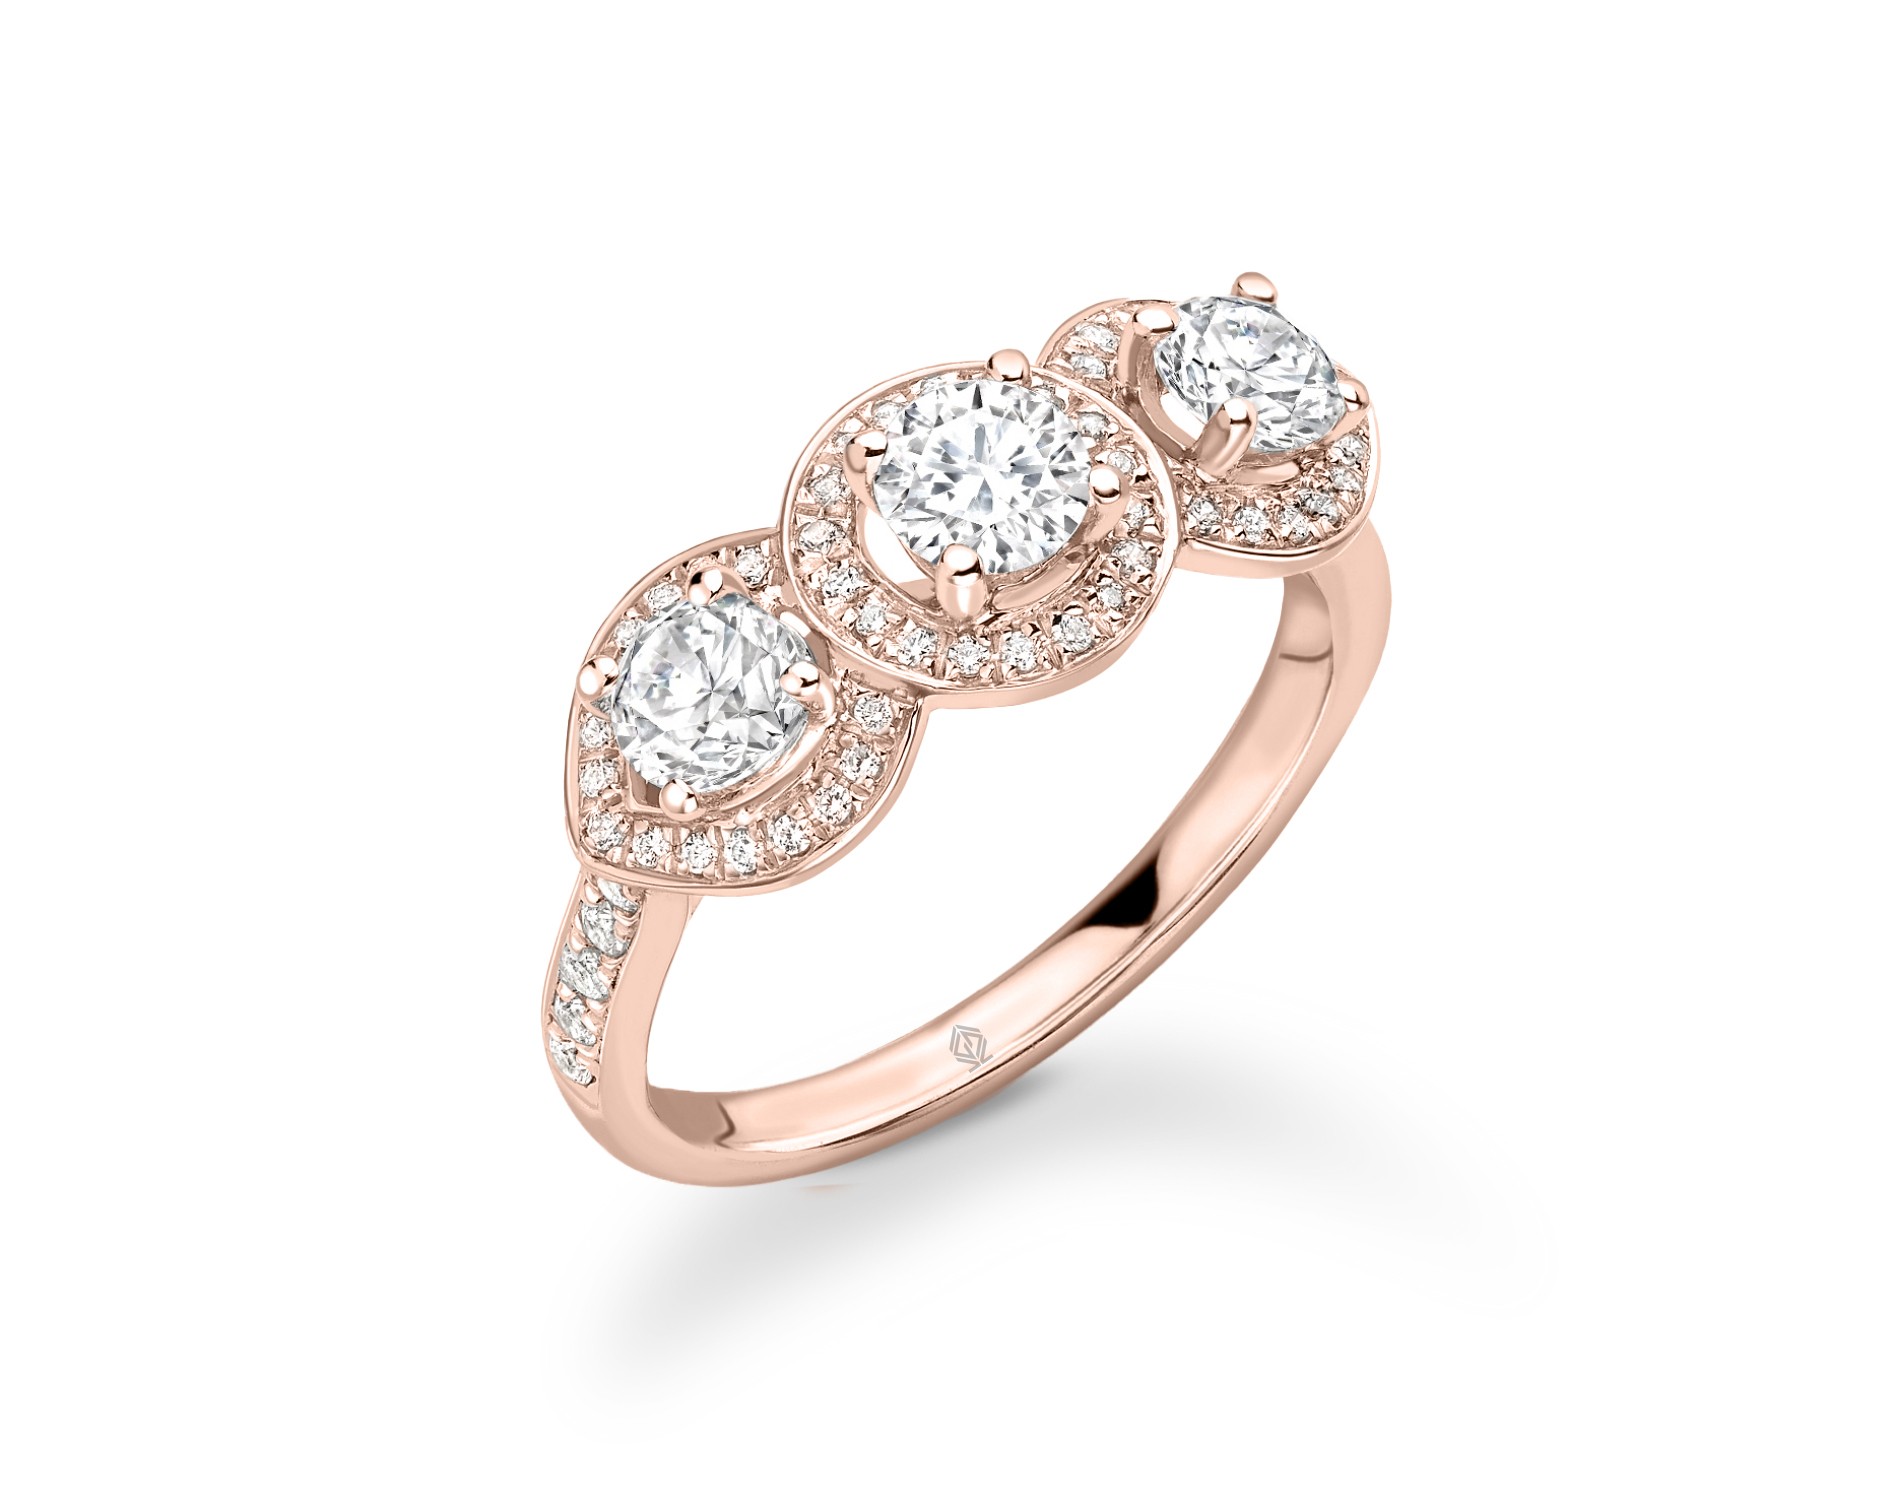 18K ROSE GOLD HALO ROUND CUT TRILOGY DIAMOND ENGAGEMENT RING WITH SIDE DIAMONDS CHANNEL SET